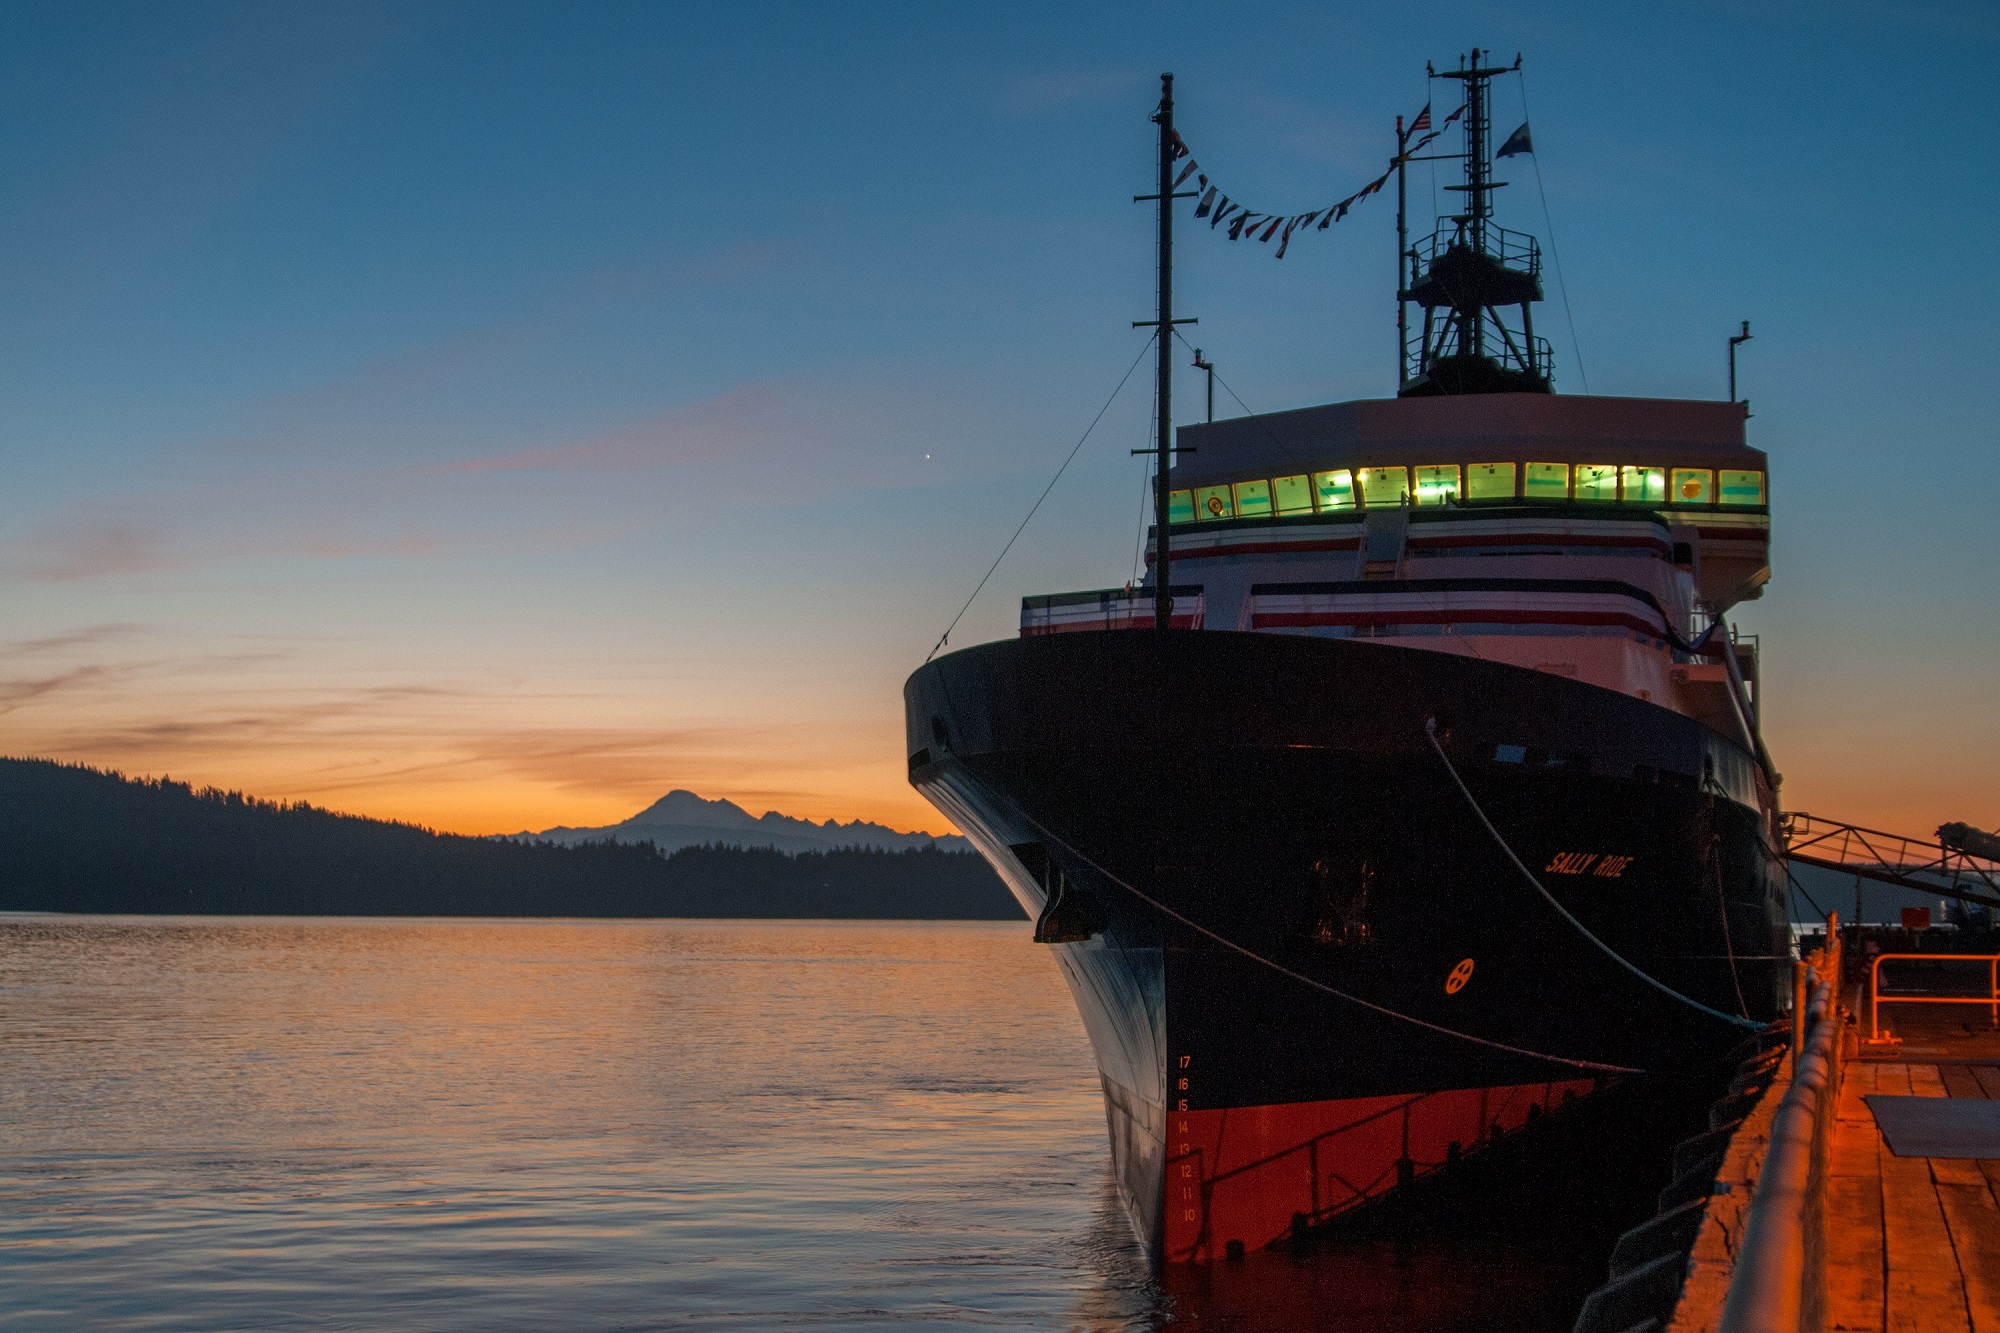 The Sally Ride research vessel, pictured at sunset